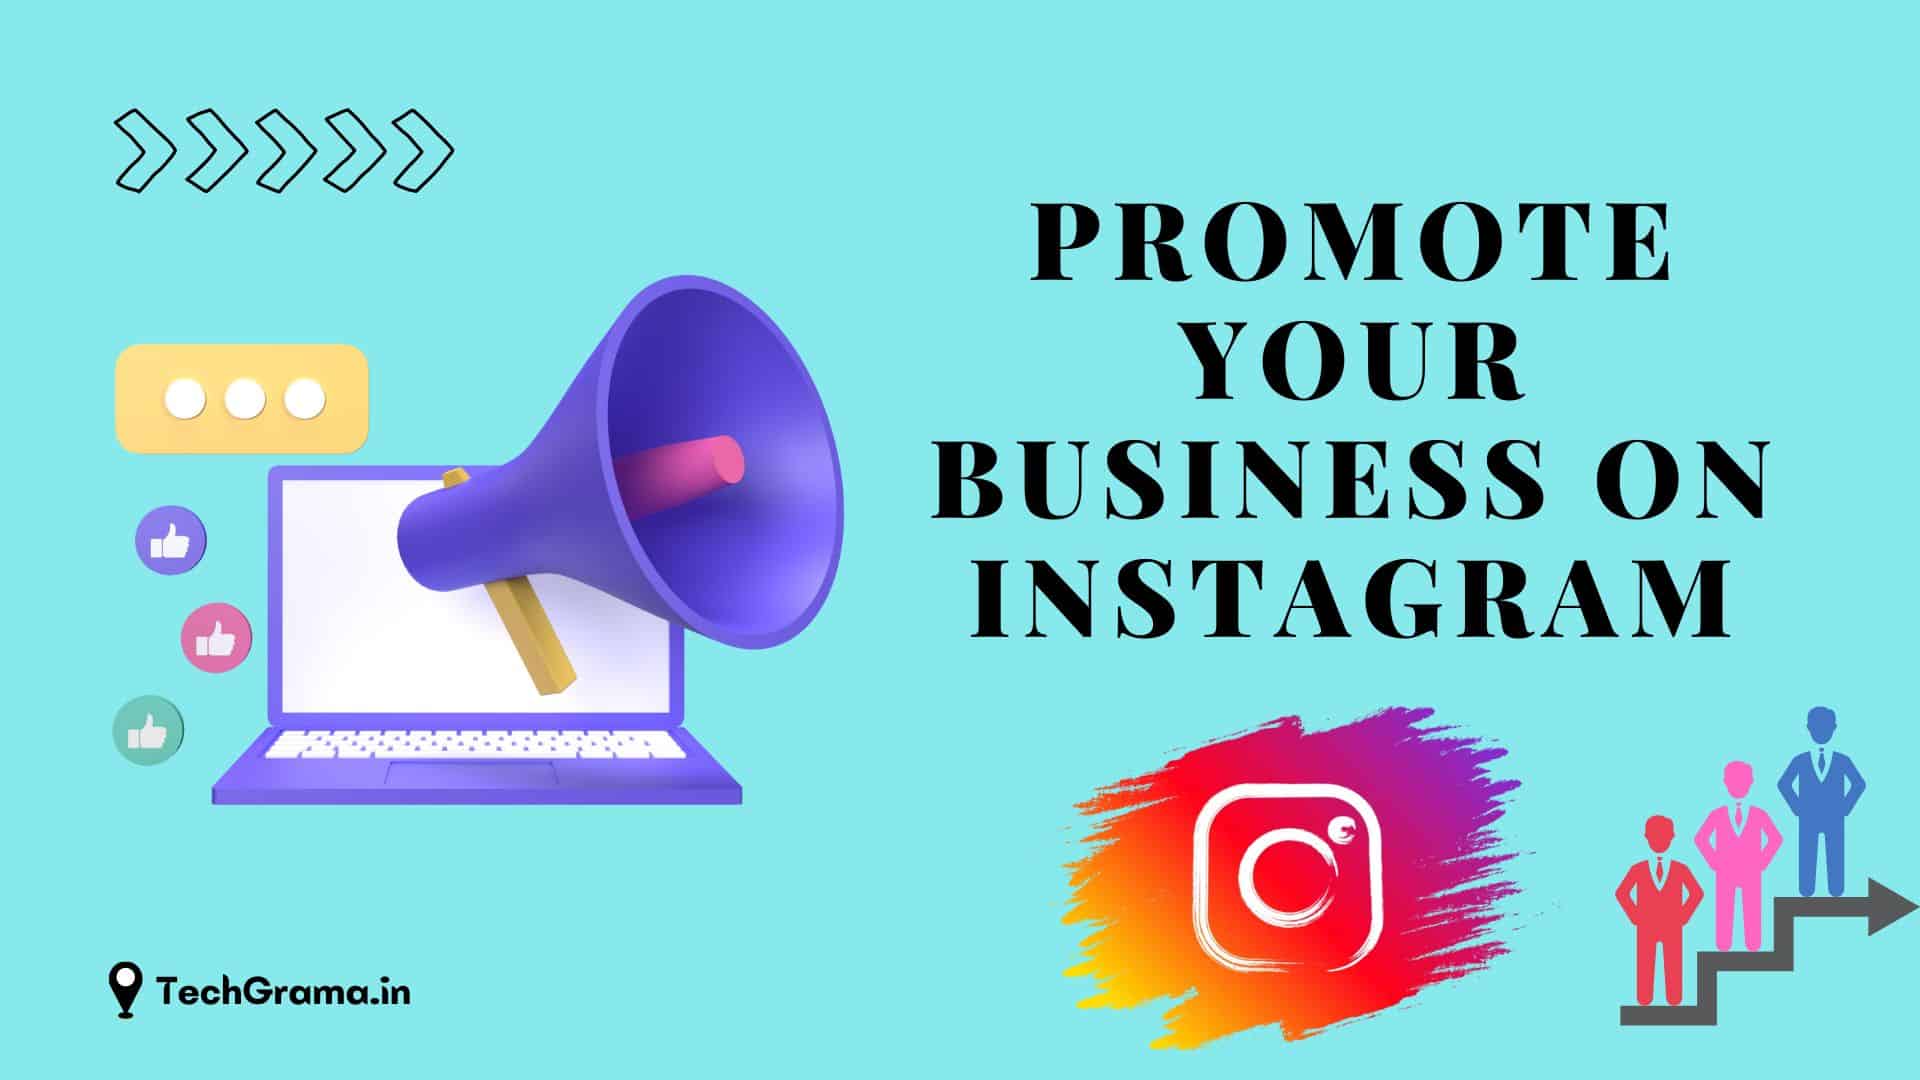 Promote your business on instagram, promote your business on instagram for free